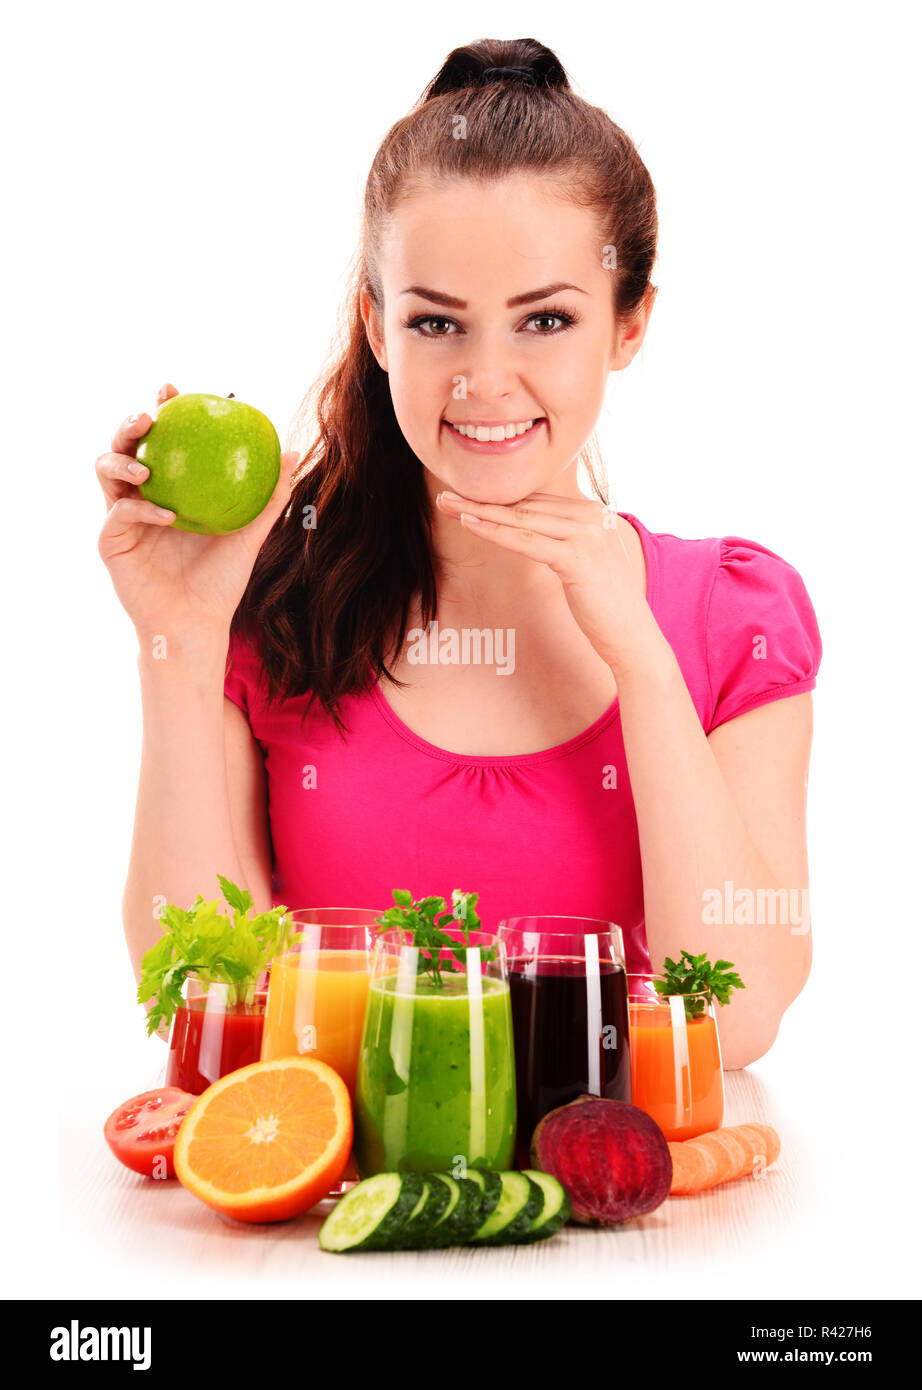 https://c8.alamy.com/comp/R427H6/young-woman-with-variety-of-vegetable-and-fruit-juices-R427H6.jpg